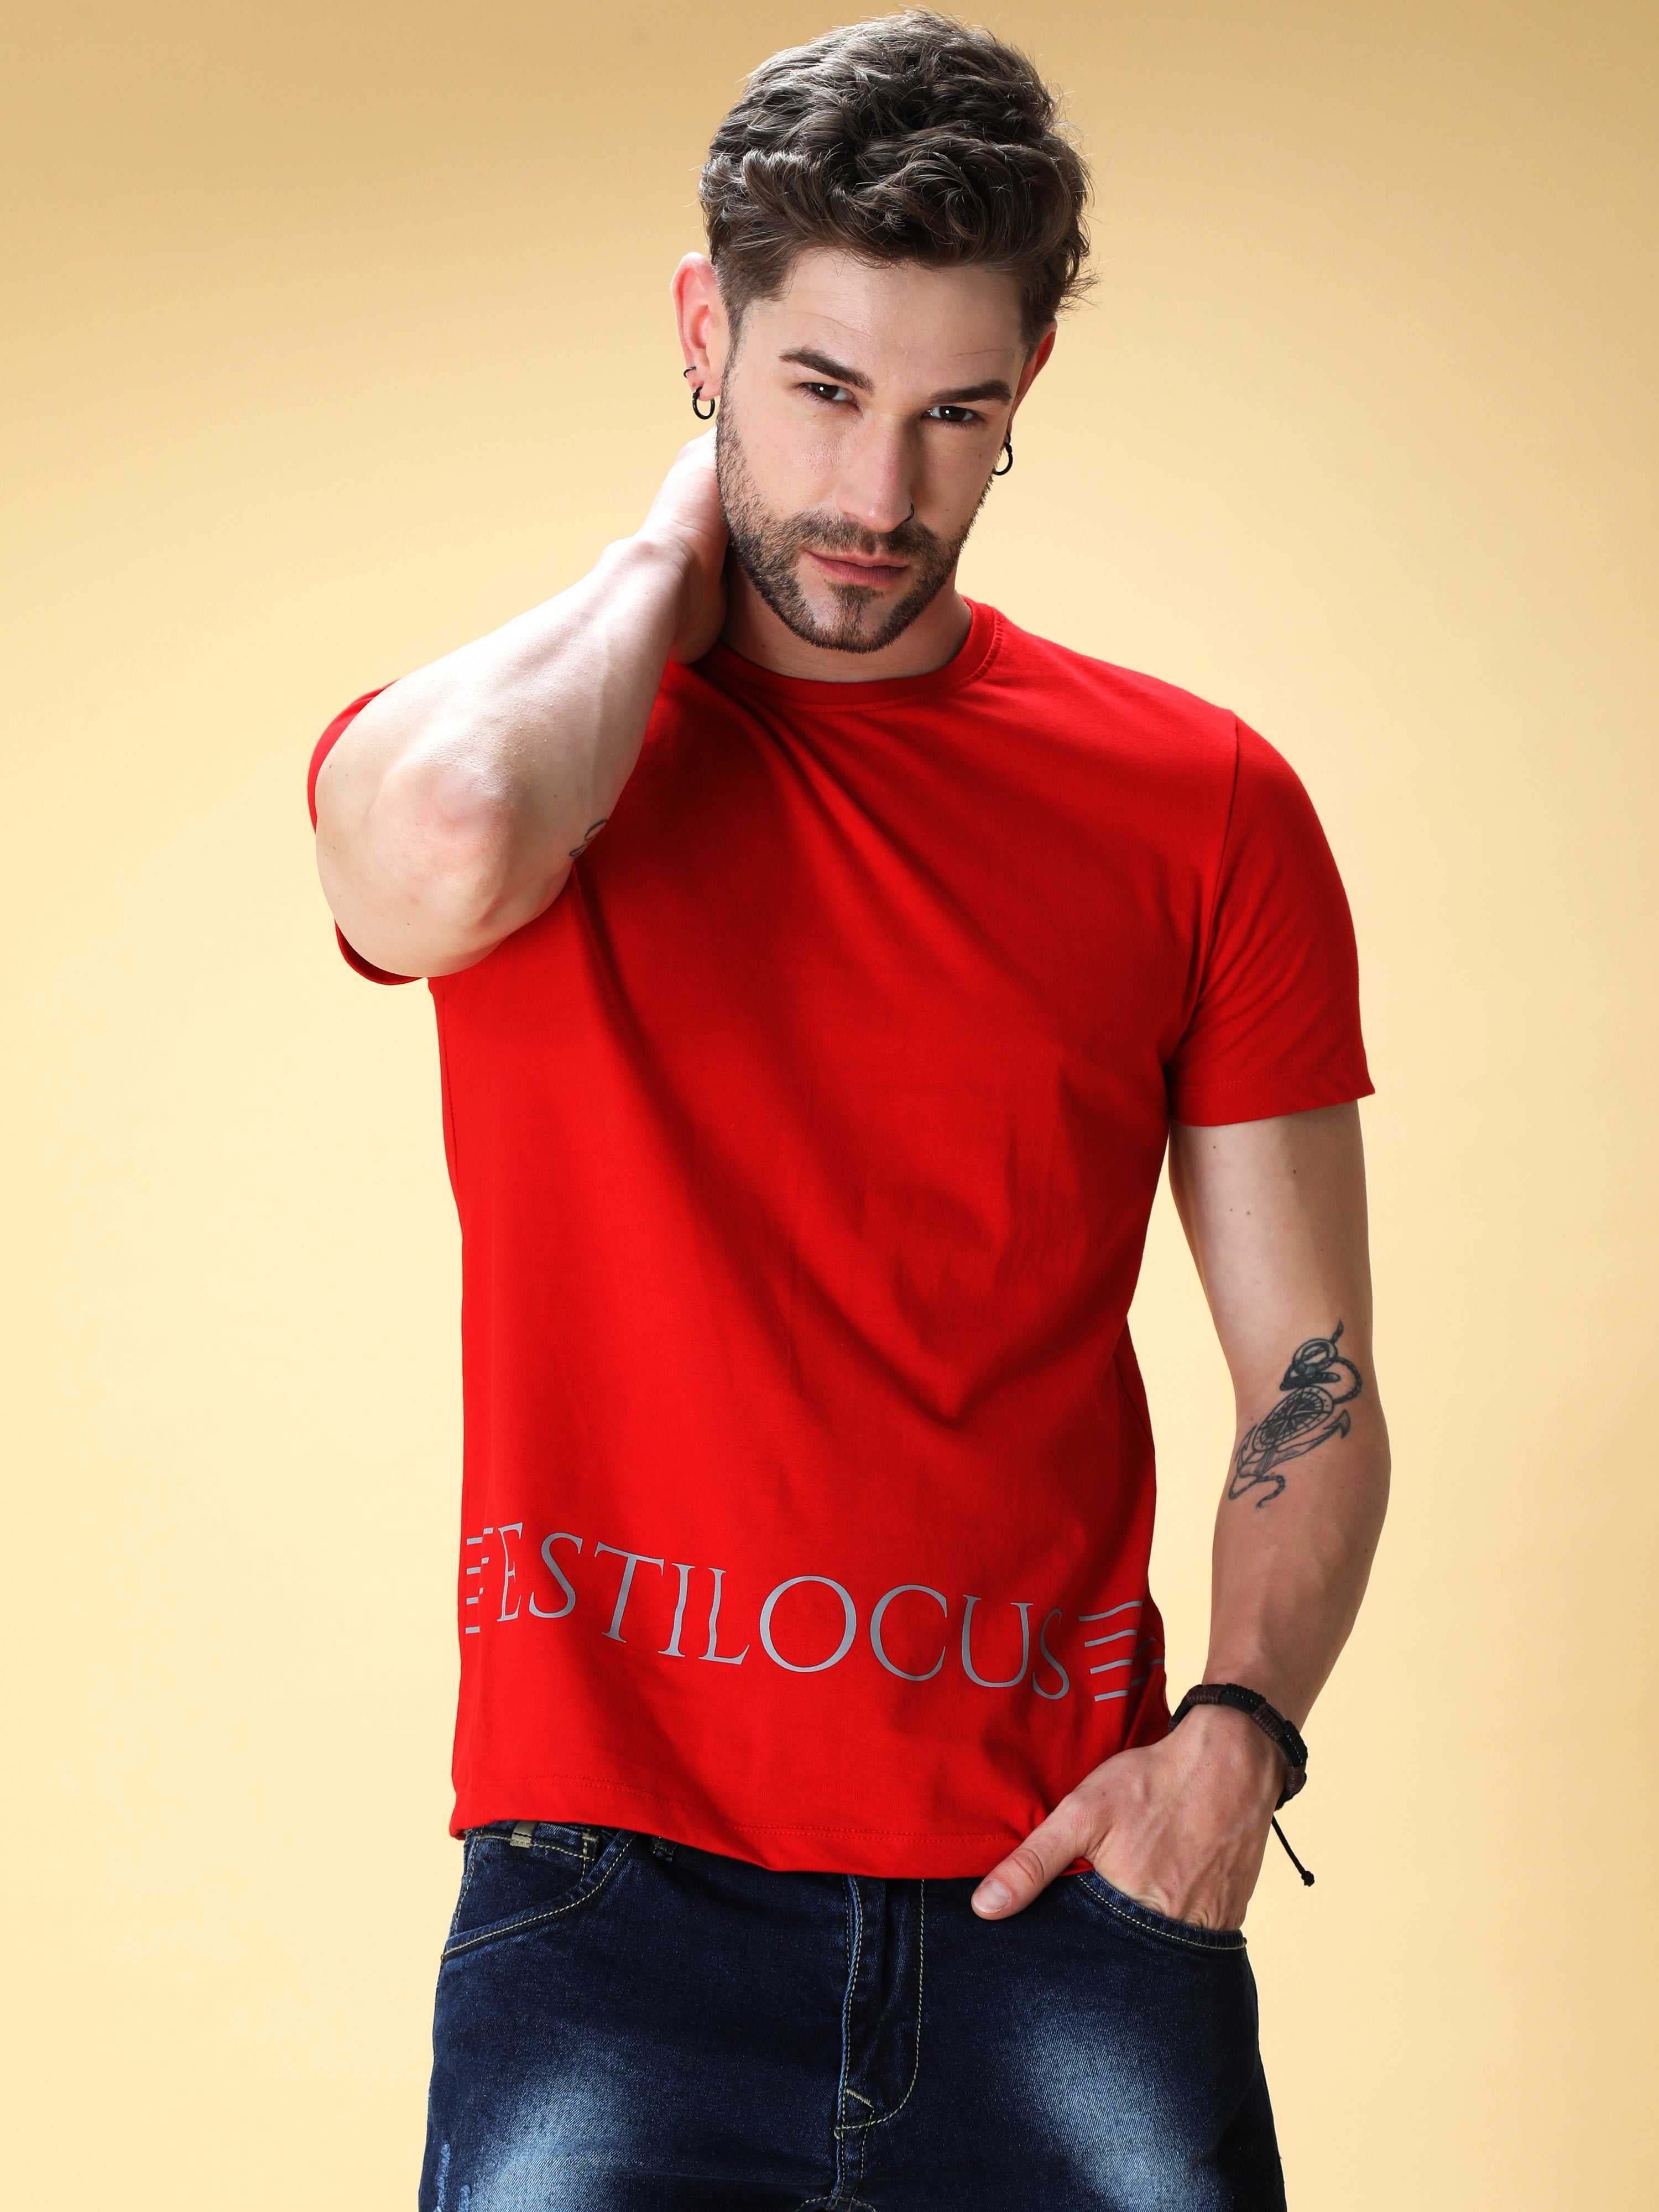 Crimson Red Crew Neck T-Shirt shop online at Estilocus. This pure cotton printed T-shirt is a stylish go-to for laidback days. Cut in a comfy regular fit. • 100% Cotton knitted interlock 190GSM• Bio washed fabric• Round neck T-shirt • Half sleeve • Suits